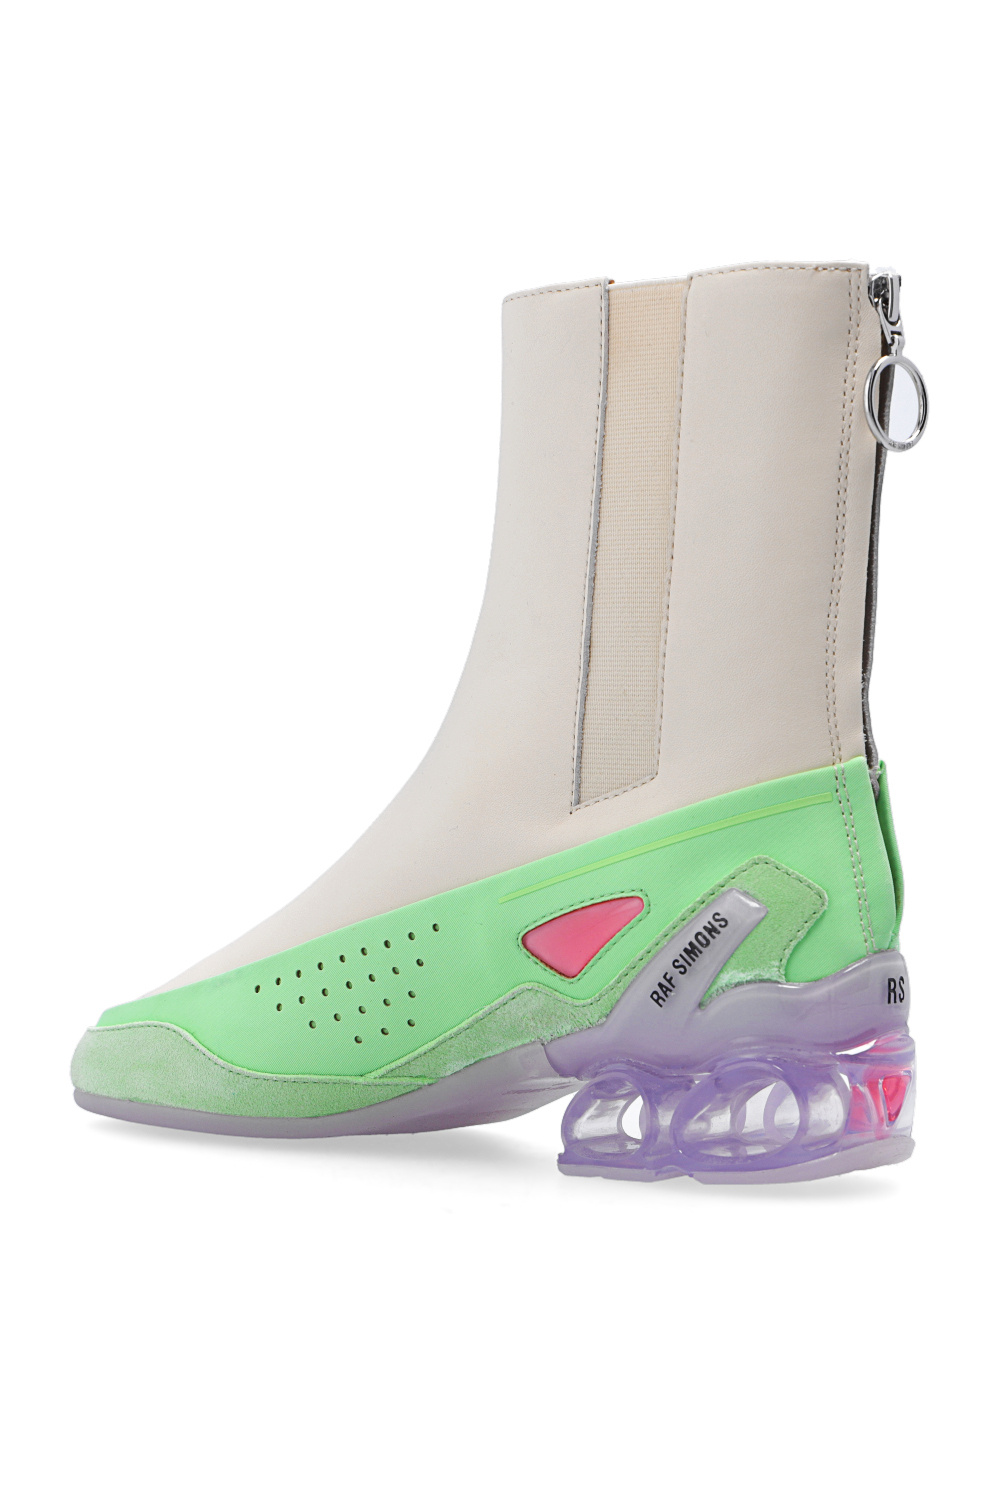 4' ankle boots | Raf Simons 'Cycloid - Men's Shoes | Viggy laser